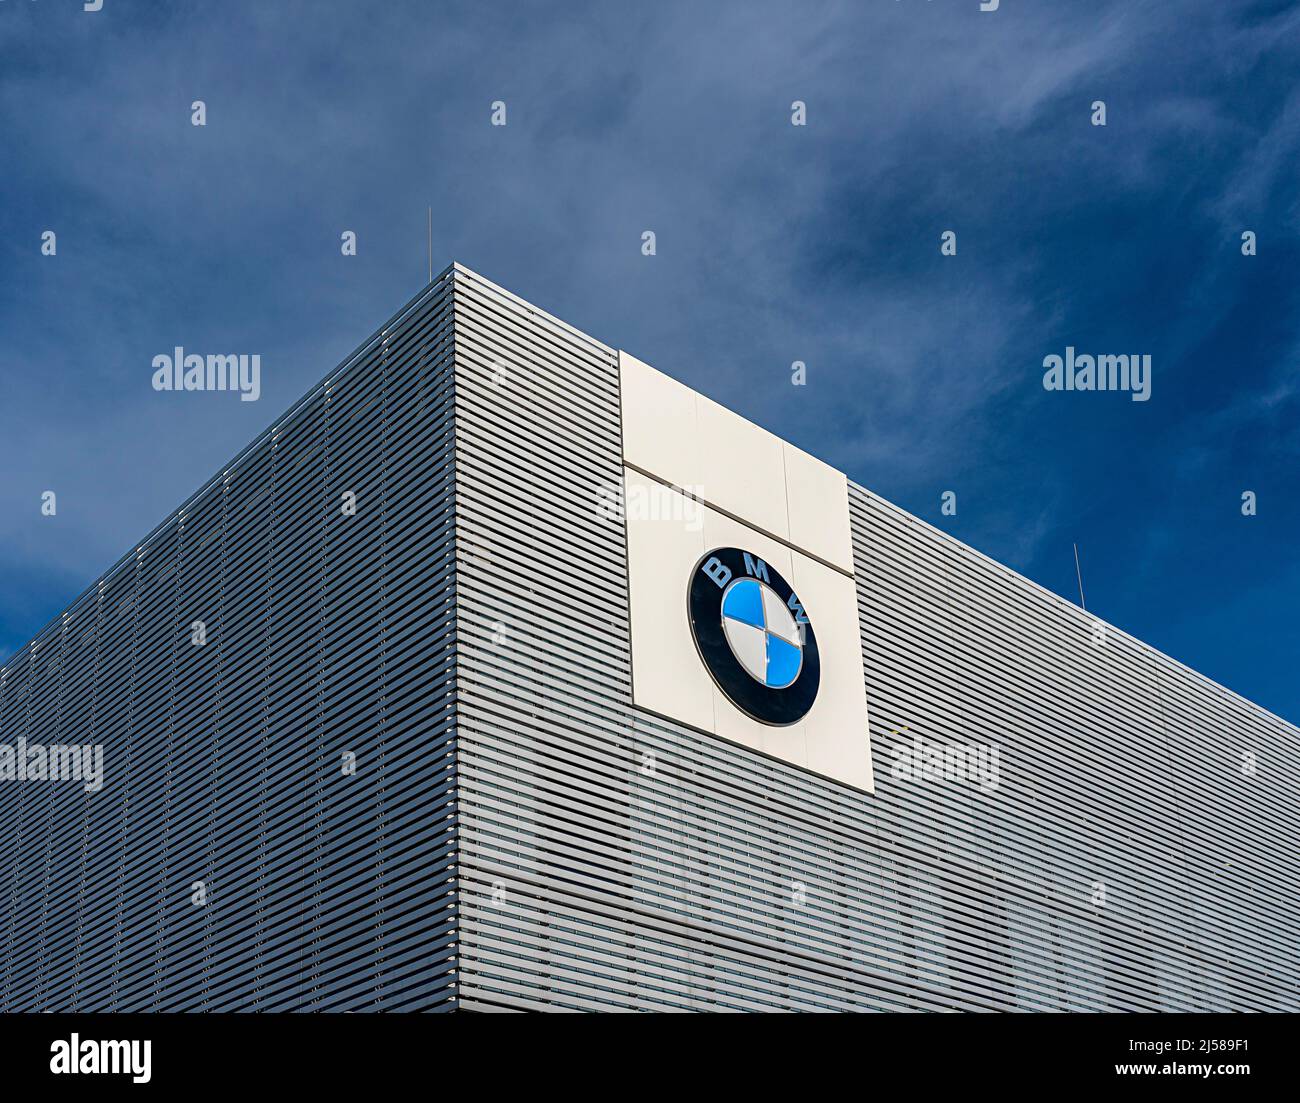 Architecture of the BMW headquarters on Kaiserdamm, Berlin, Germany Stock Photo